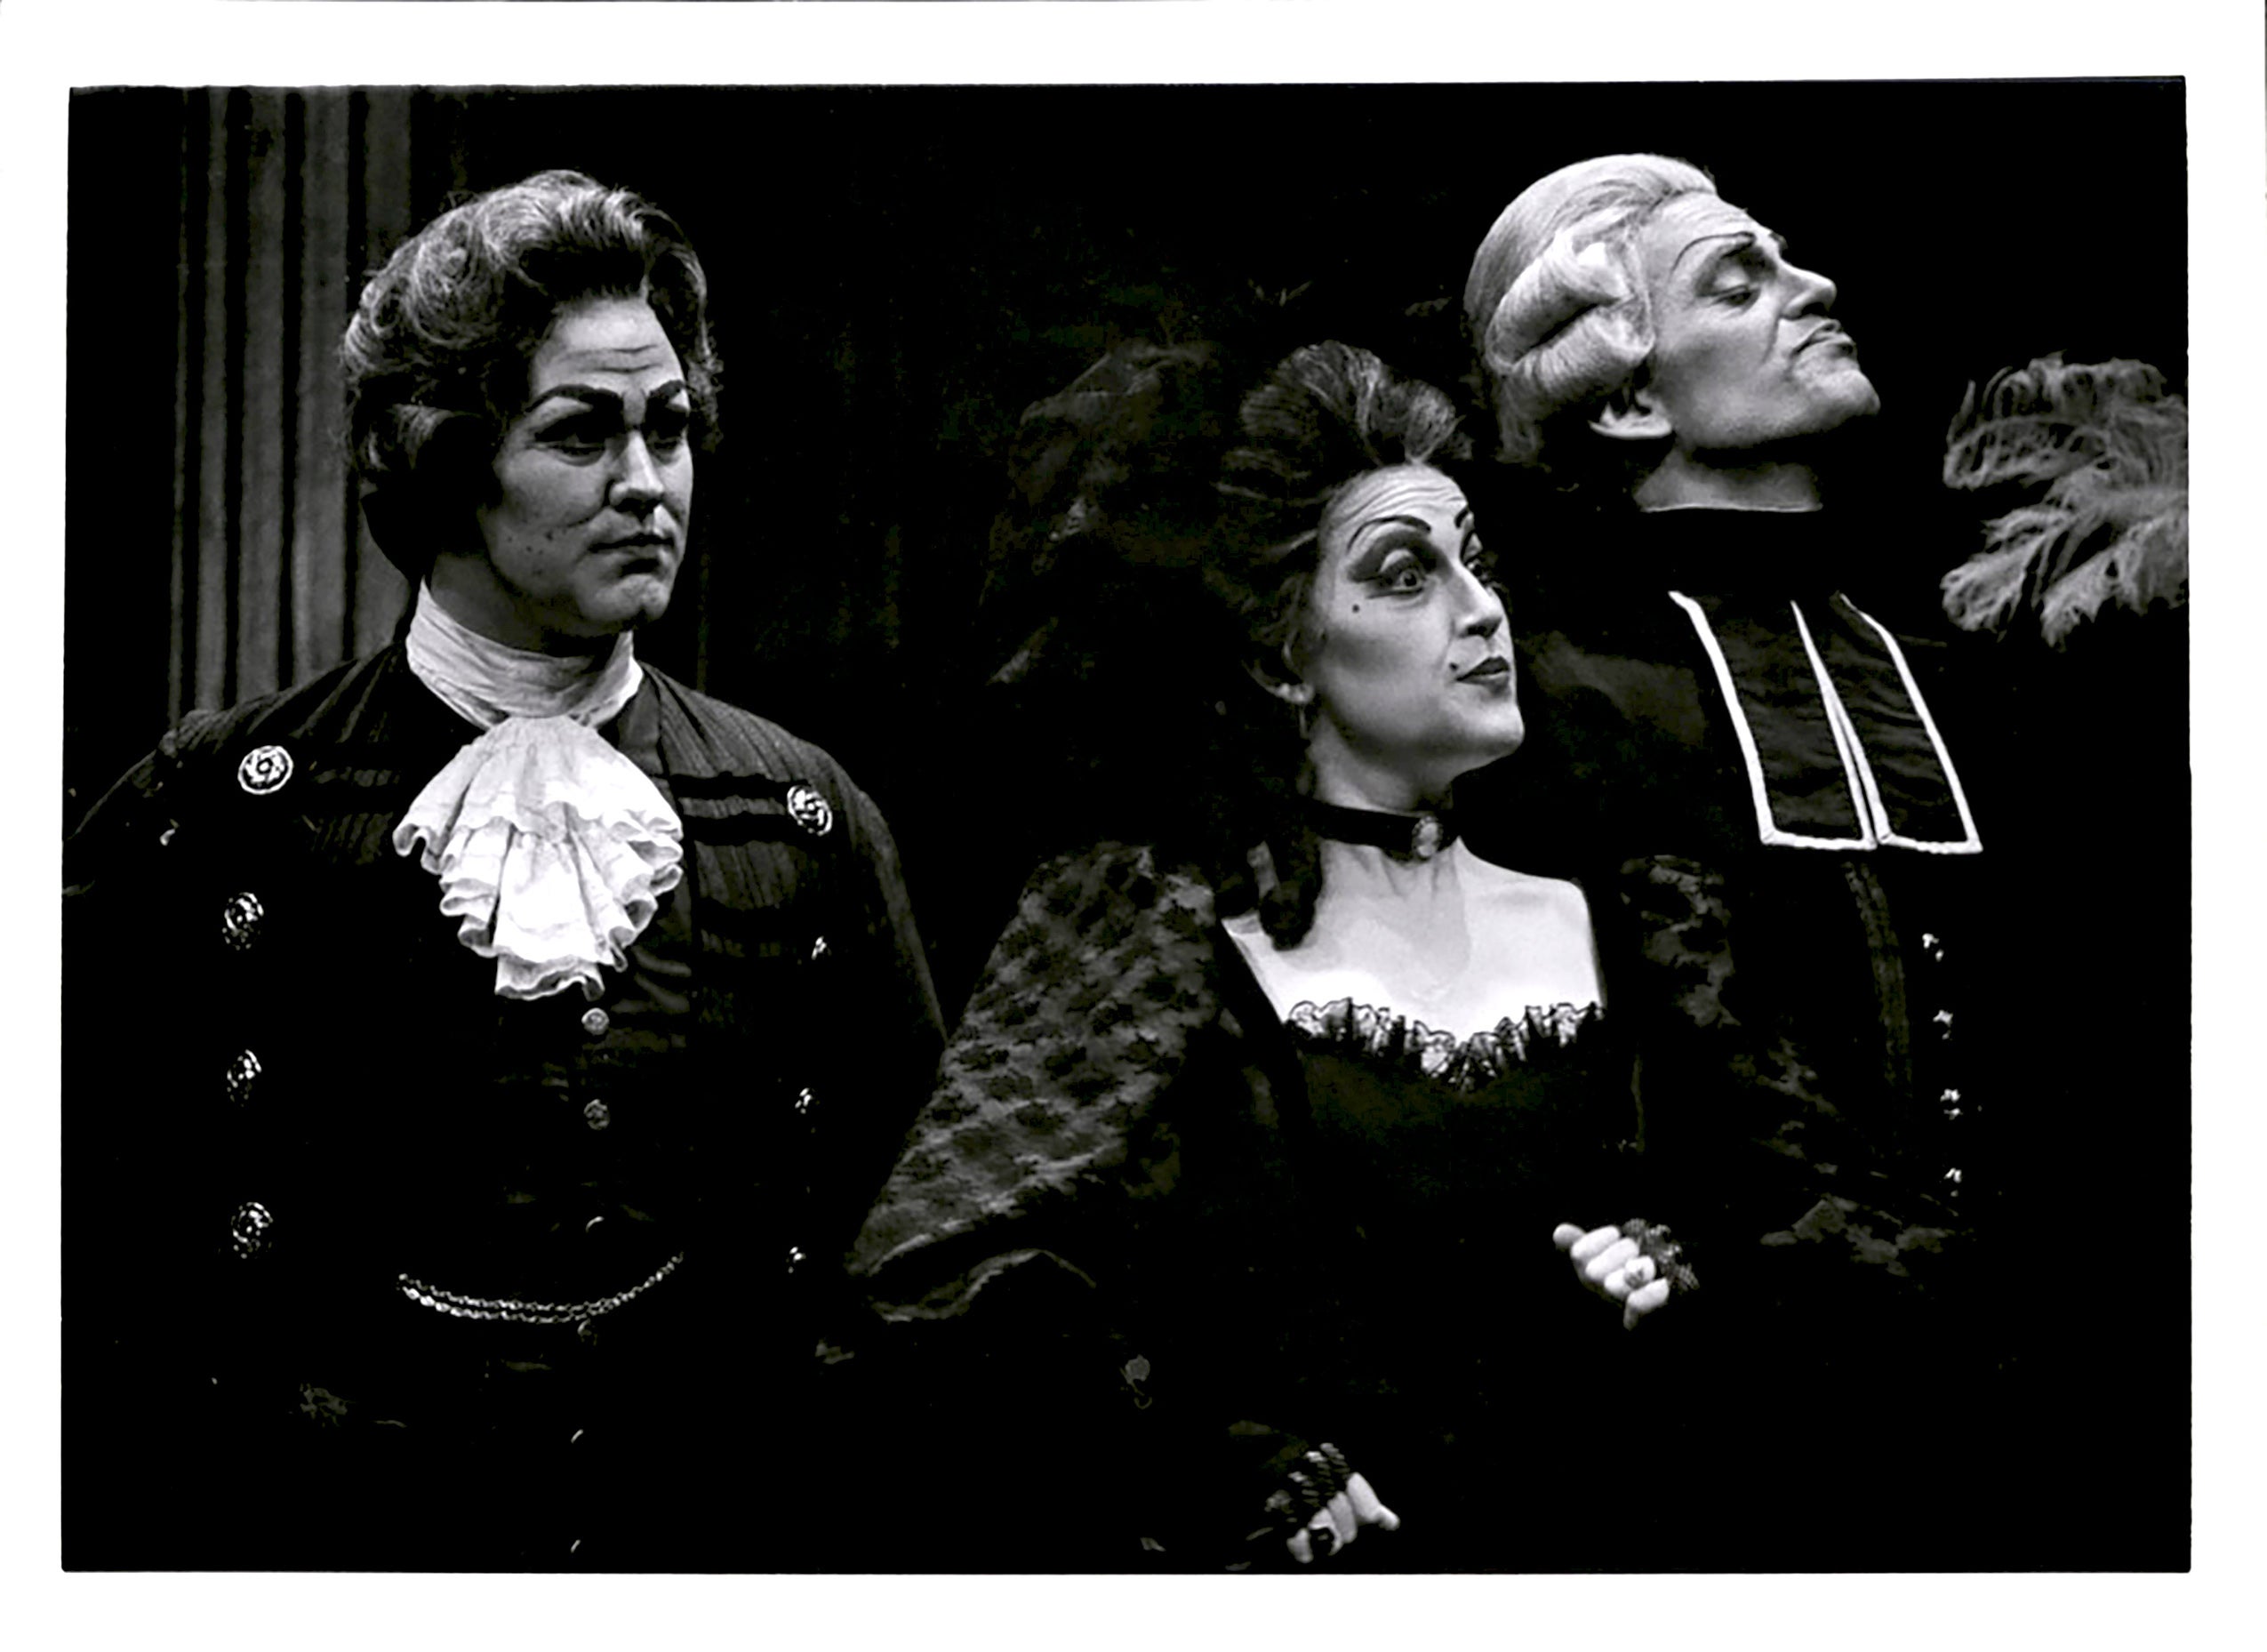 Three actors wearing costumes performing on a stage